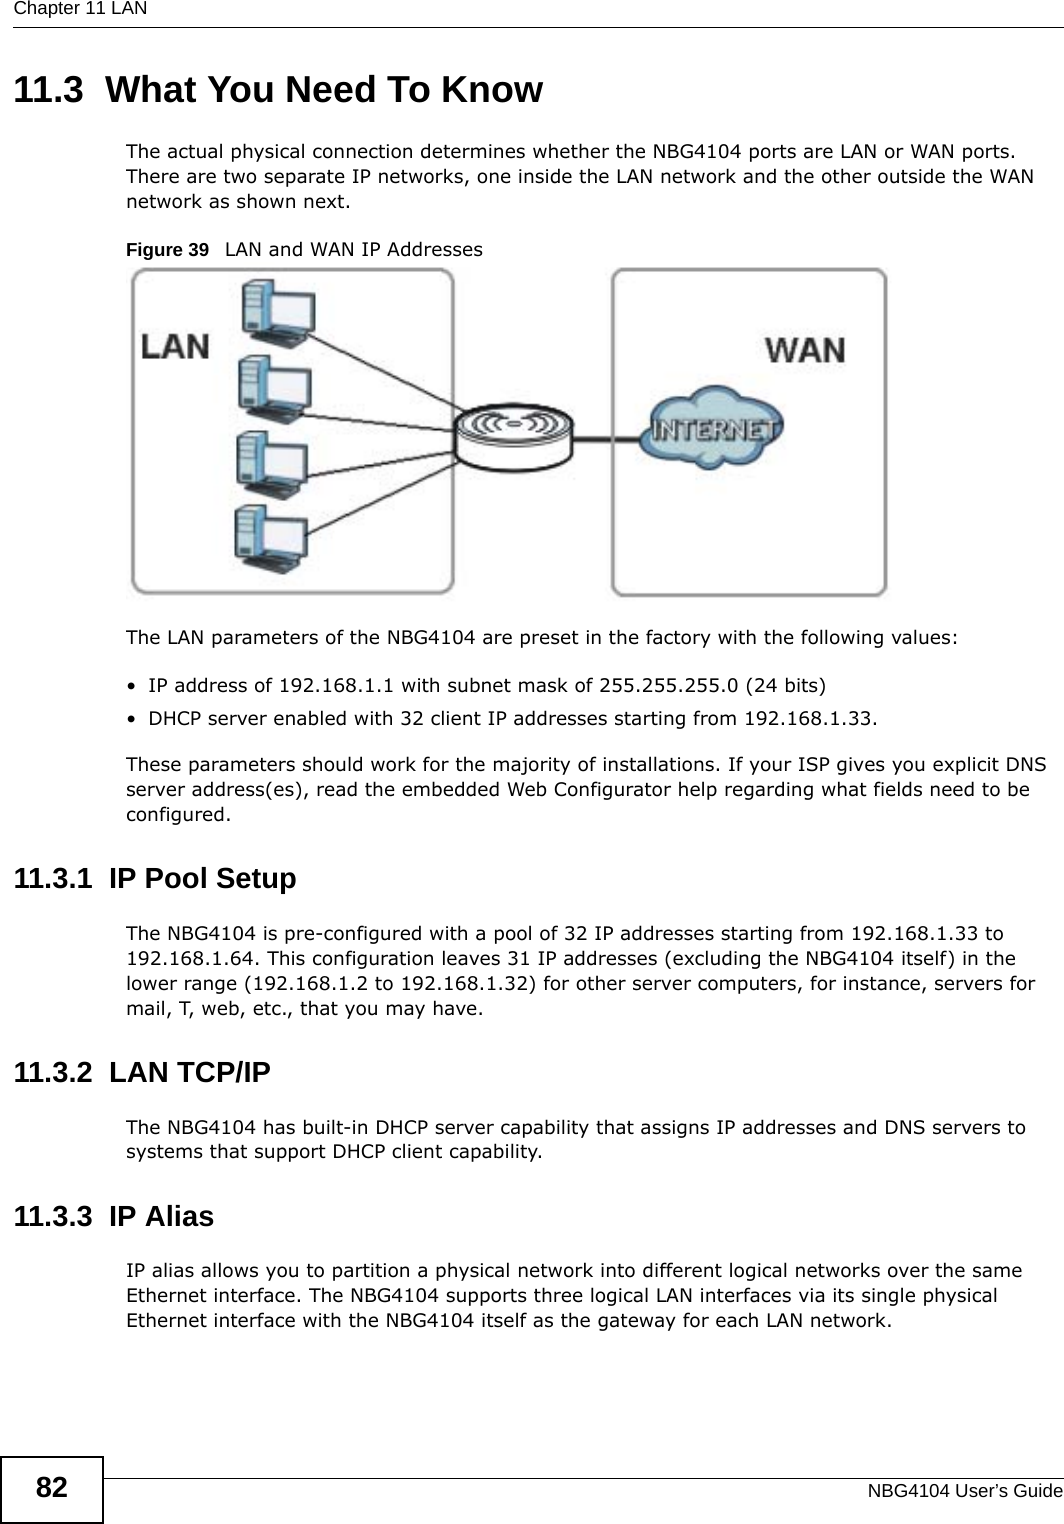 Chapter 11 LANNBG4104 User’s Guide8211.3  What You Need To KnowThe actual physical connection determines whether the NBG4104 ports are LAN or WAN ports. There are two separate IP networks, one inside the LAN network and the other outside the WAN network as shown next.Figure 39   LAN and WAN IP AddressesThe LAN parameters of the NBG4104 are preset in the factory with the following values:• IP address of 192.168.1.1 with subnet mask of 255.255.255.0 (24 bits)• DHCP server enabled with 32 client IP addresses starting from 192.168.1.33. These parameters should work for the majority of installations. If your ISP gives you explicit DNS server address(es), read the embedded Web Configurator help regarding what fields need to be configured.11.3.1  IP Pool SetupThe NBG4104 is pre-configured with a pool of 32 IP addresses starting from 192.168.1.33 to 192.168.1.64. This configuration leaves 31 IP addresses (excluding the NBG4104 itself) in the lower range (192.168.1.2 to 192.168.1.32) for other server computers, for instance, servers for mail, T, web, etc., that you may have.11.3.2  LAN TCP/IP The NBG4104 has built-in DHCP server capability that assigns IP addresses and DNS servers to systems that support DHCP client capability.11.3.3  IP AliasIP alias allows you to partition a physical network into different logical networks over the same Ethernet interface. The NBG4104 supports three logical LAN interfaces via its single physical Ethernet interface with the NBG4104 itself as the gateway for each LAN network.